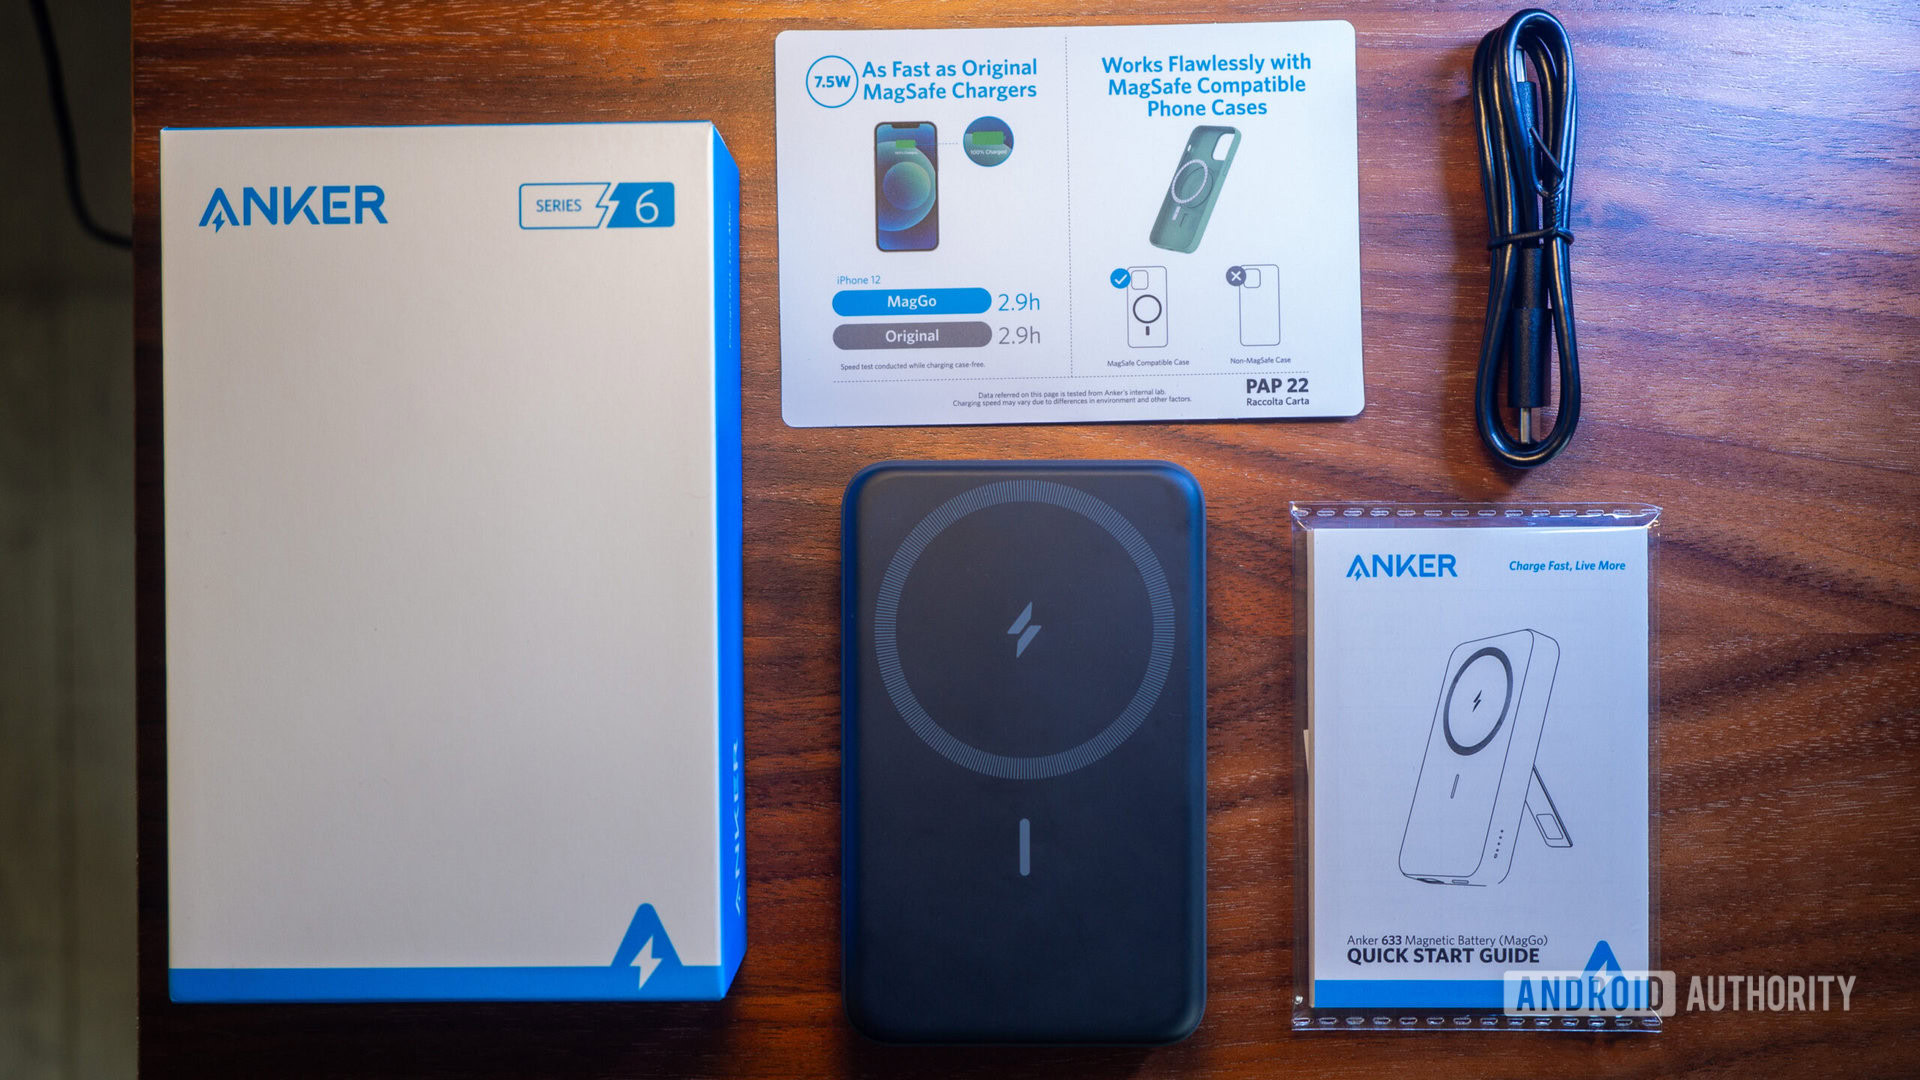 The Anker 633 magnetic battery saved me during a busy vacation